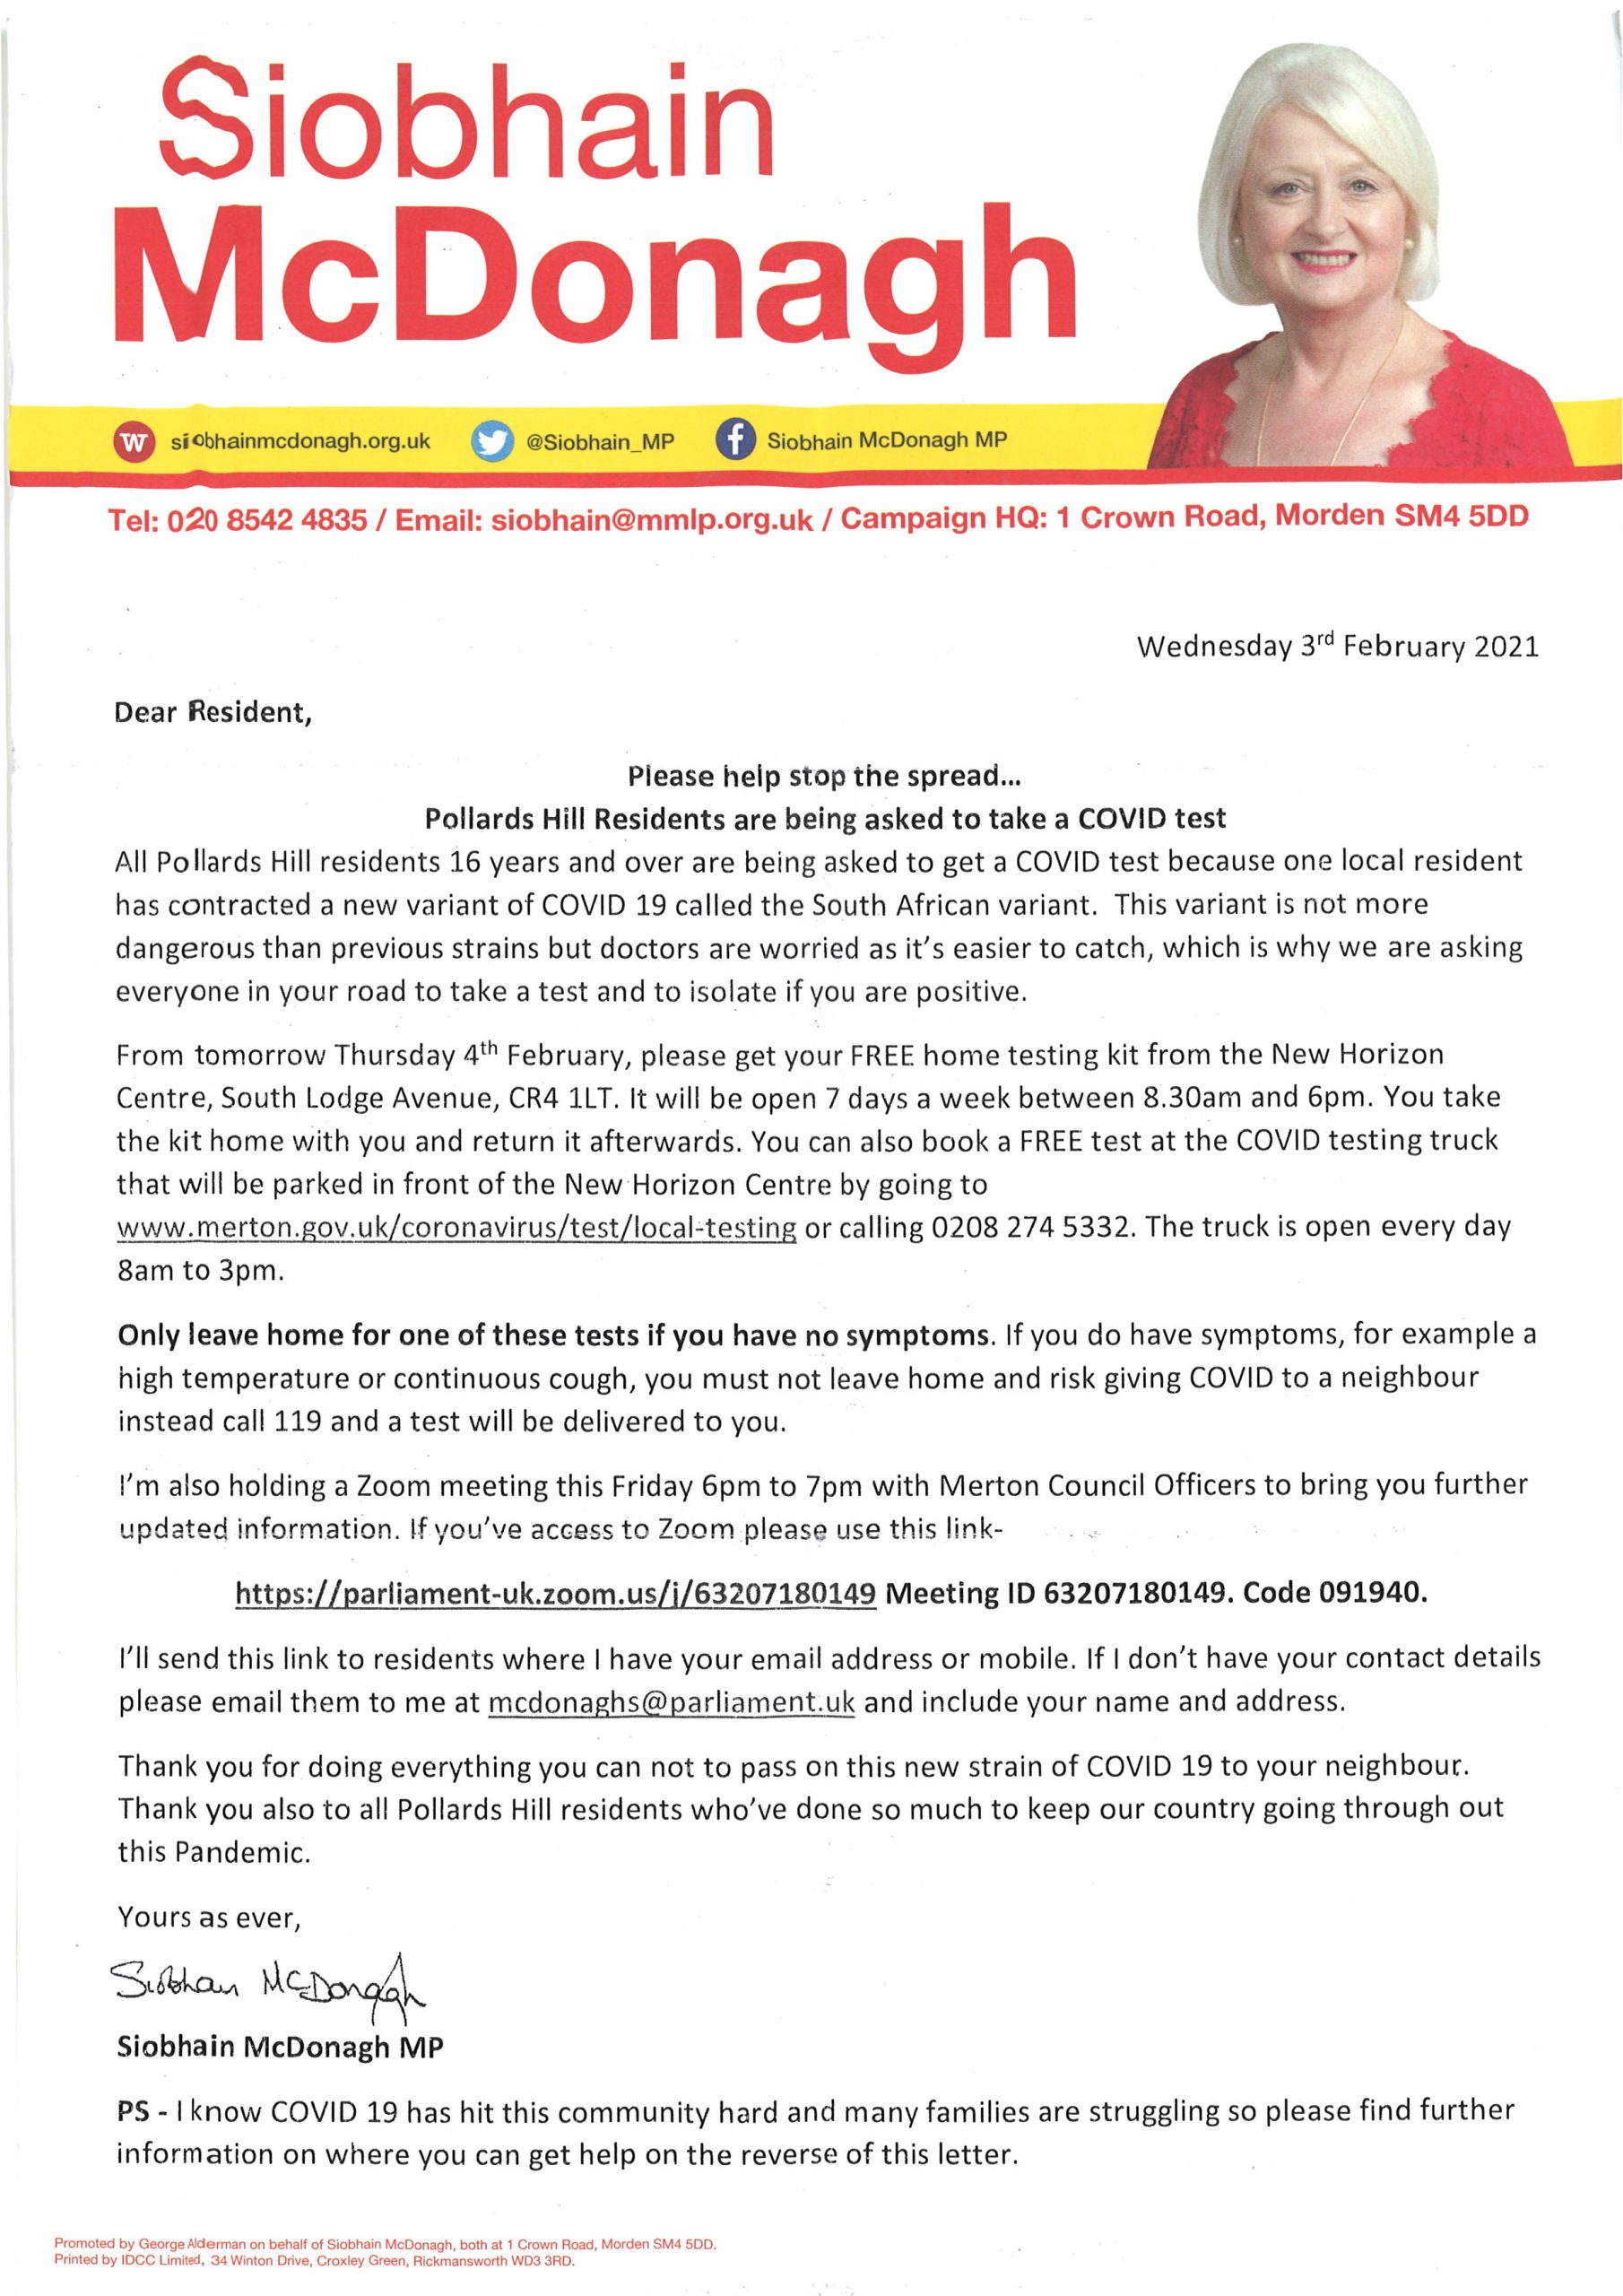 Siobhain Letter for Pollards Hill - Wrong Twitter Account, False Printed by Statement, No mention of people who work in Pollards Hill